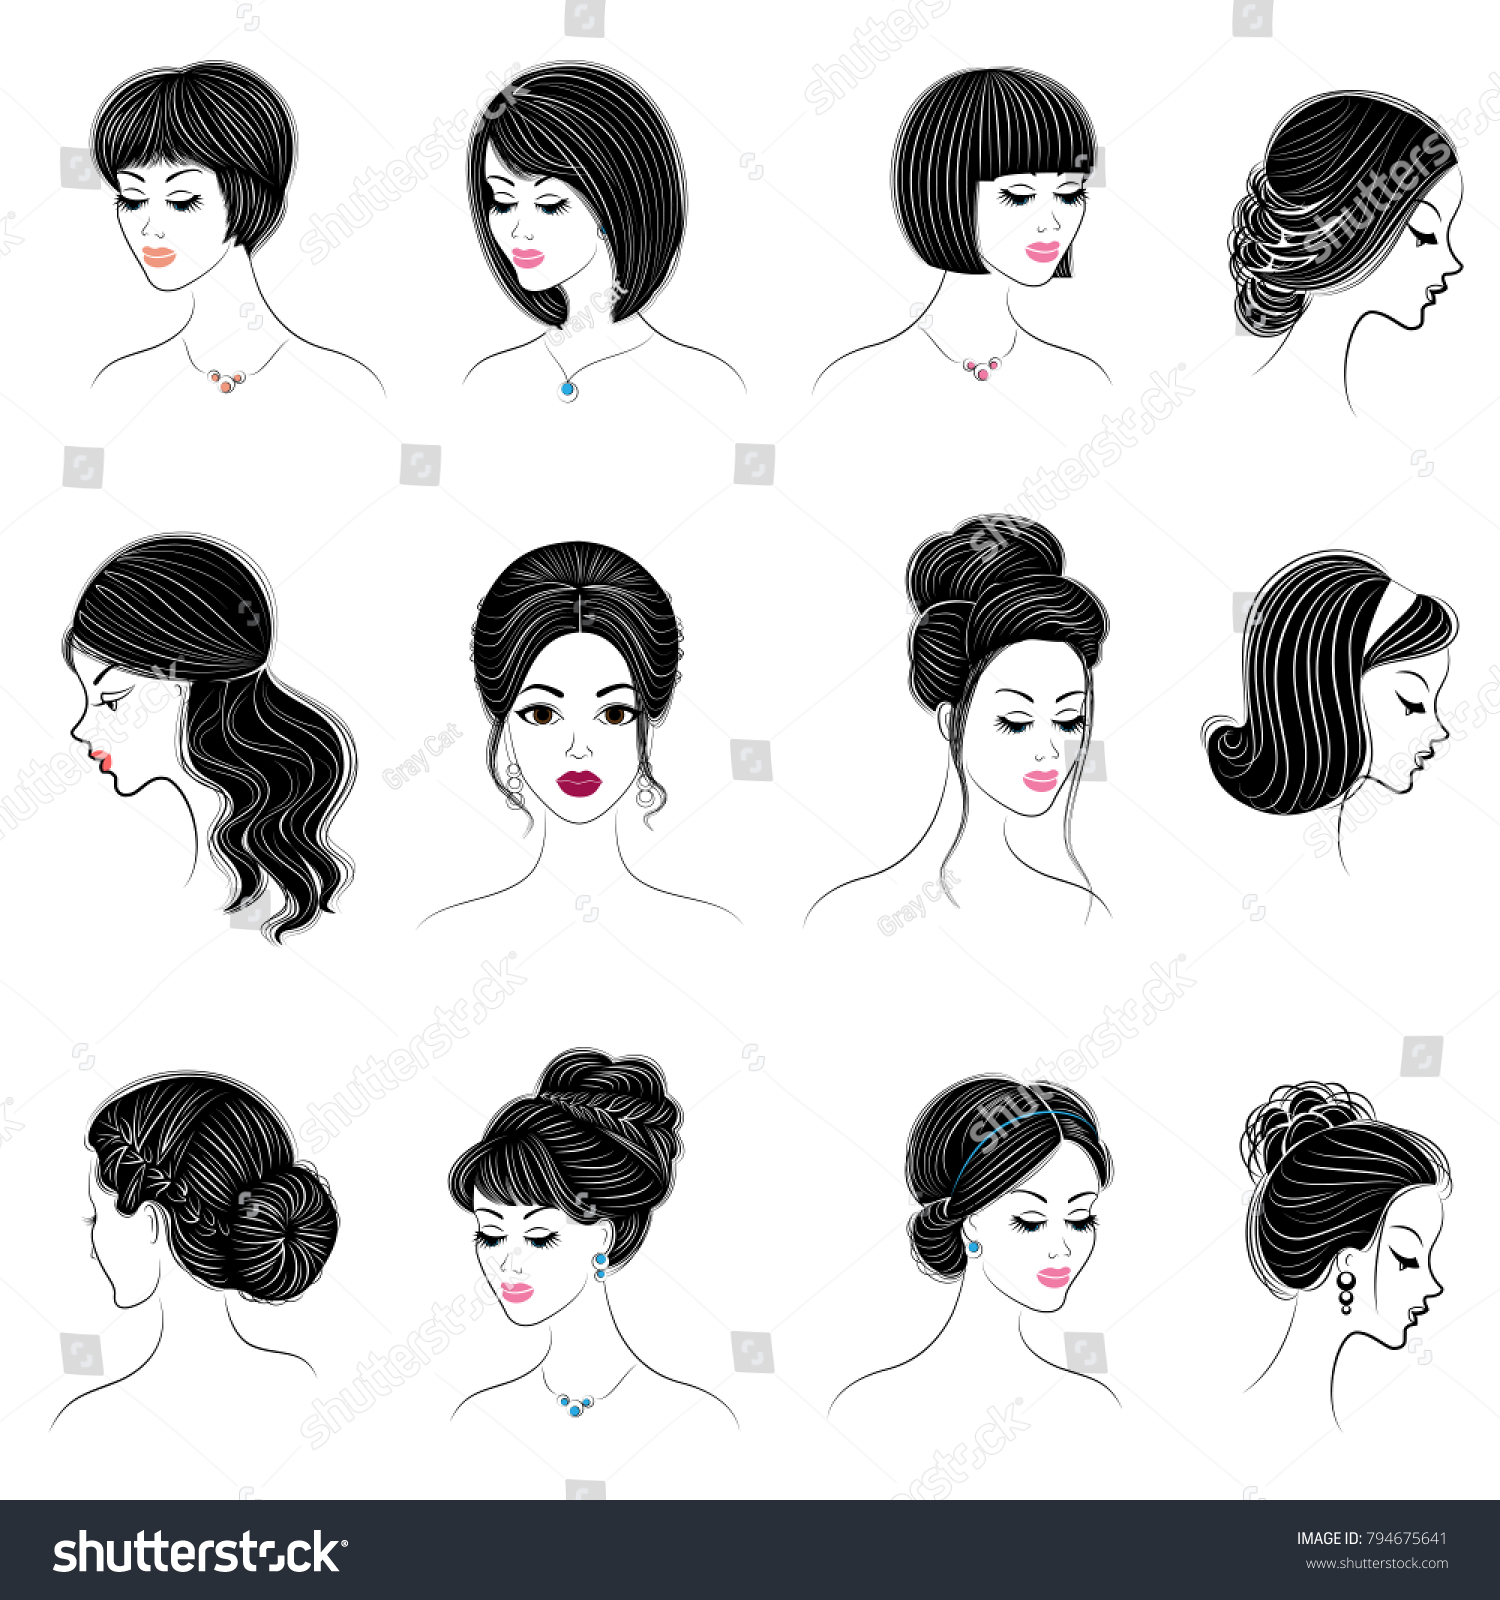 Collection Silhouettes Head Lovely Ladies Girls Stock Vector